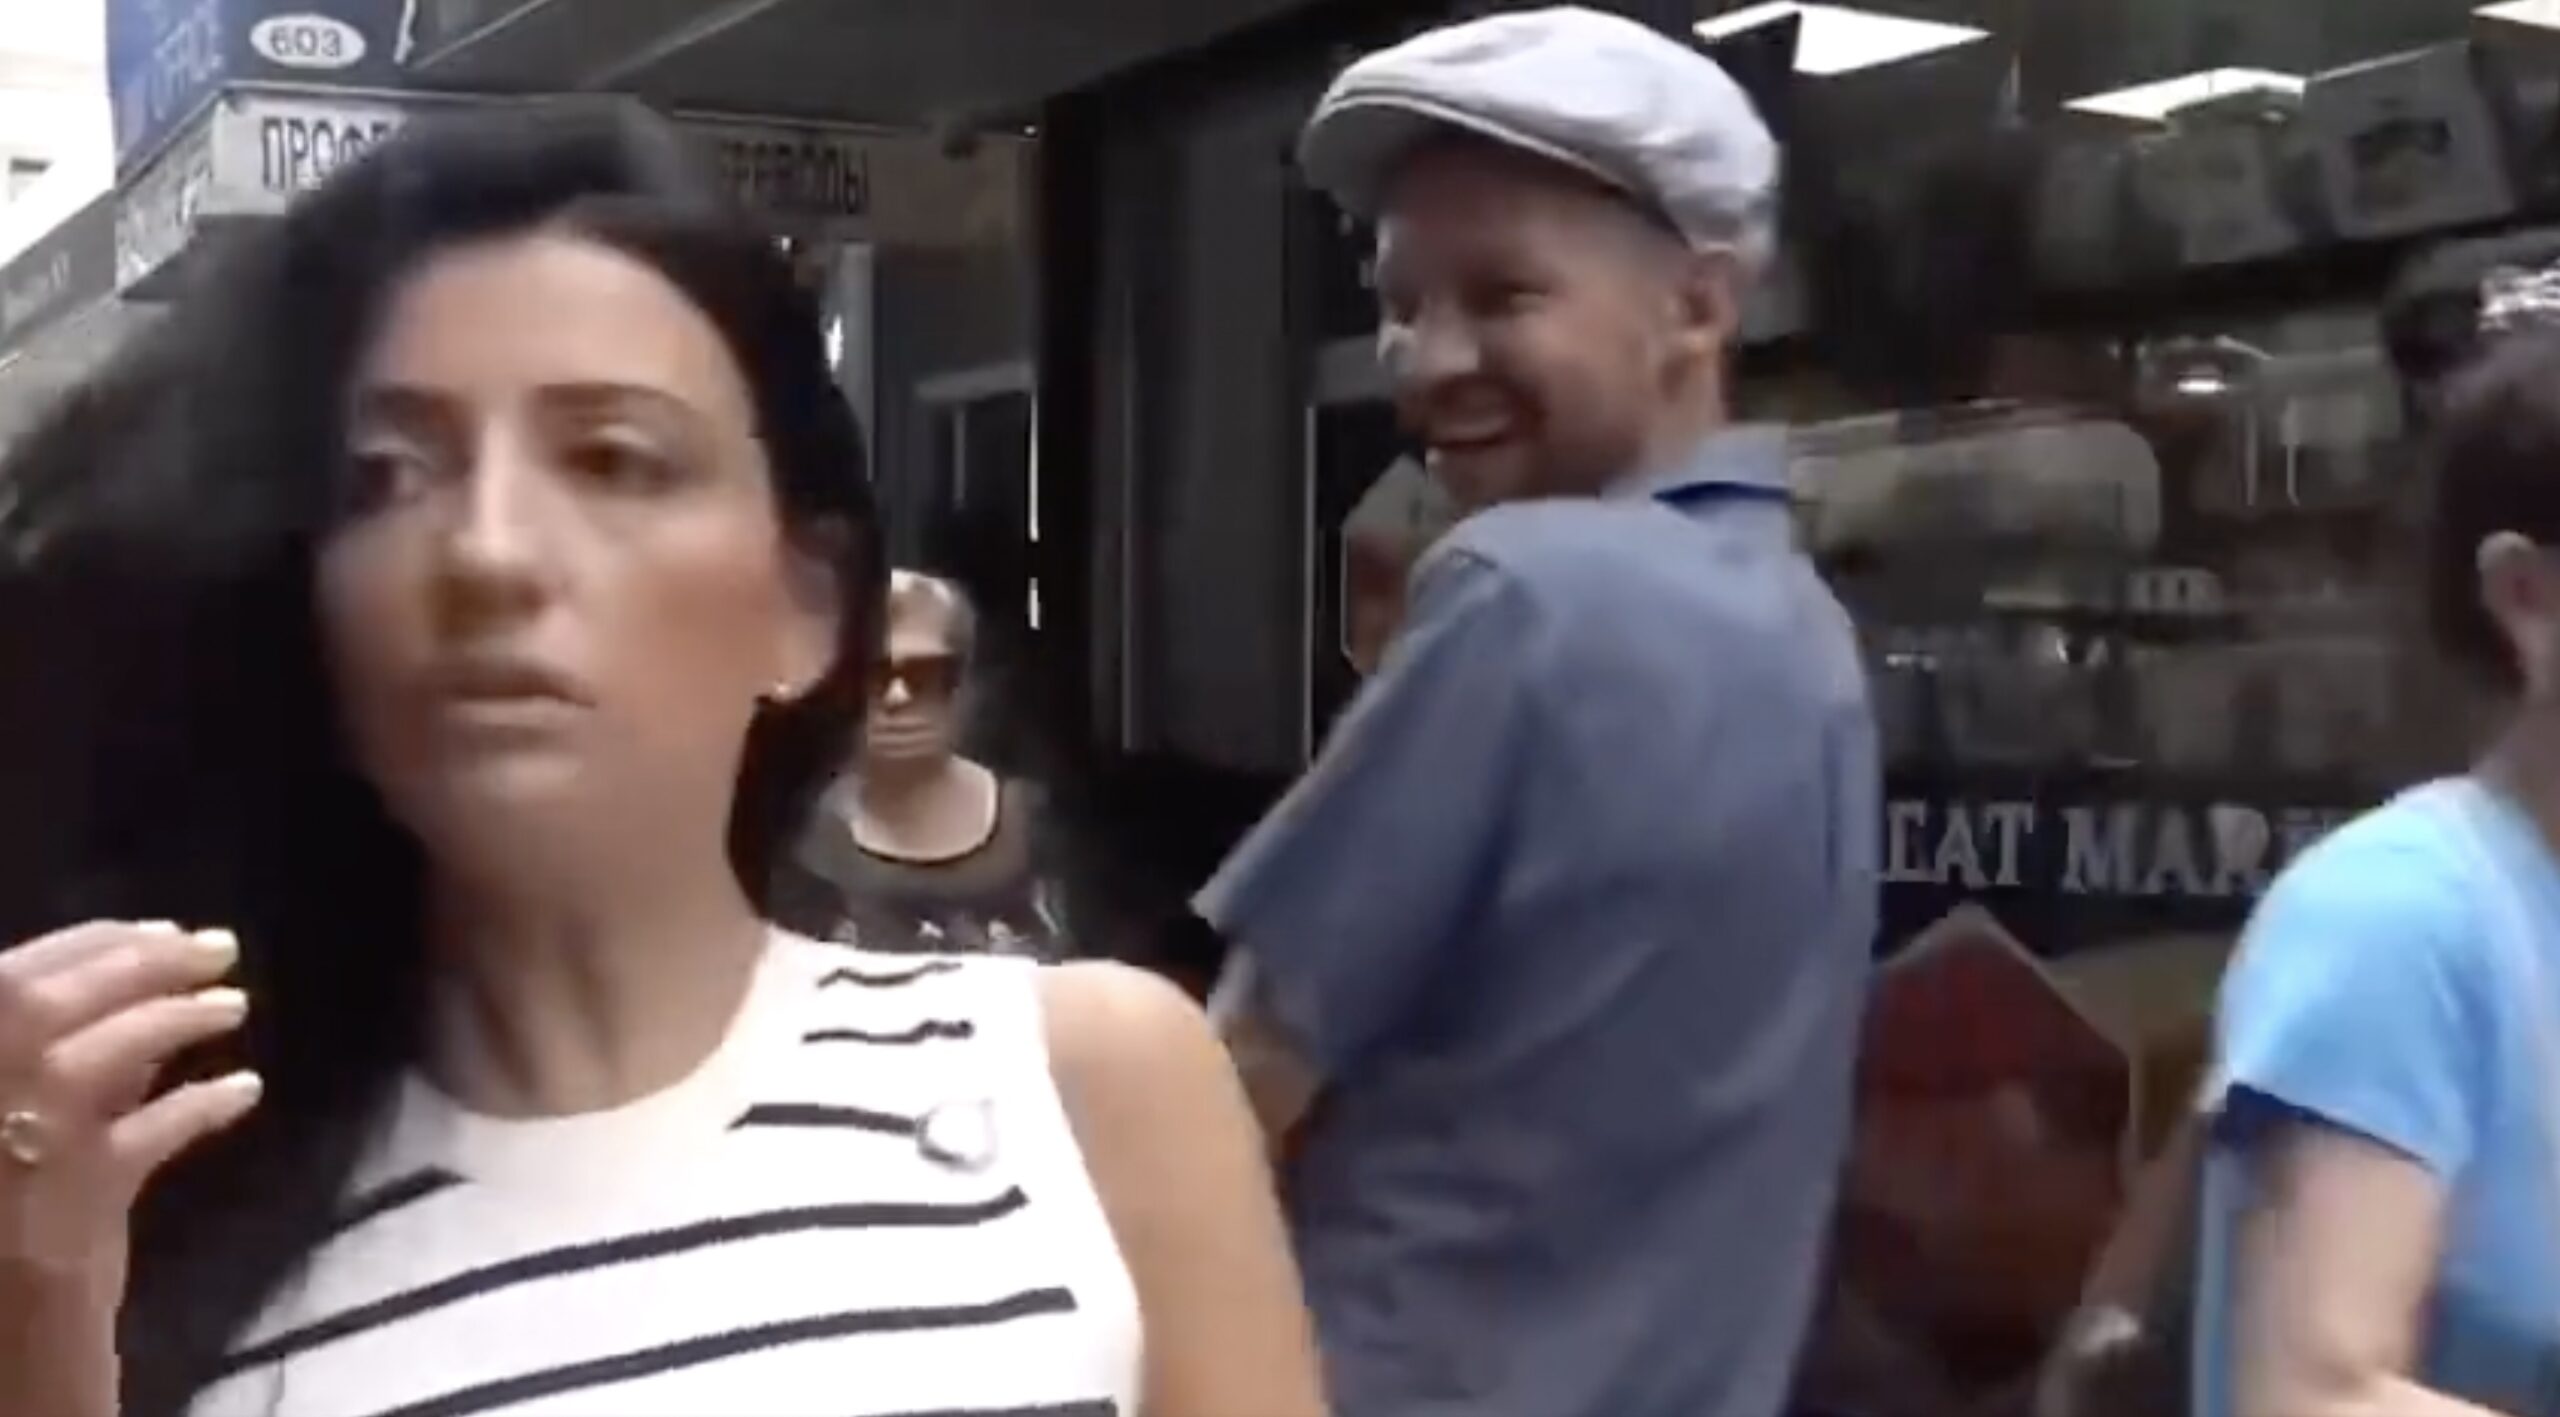 ‘What the F*ck!?’ New York Councilwoman Kissed by ‘Creepy’ Stranger During CBS Interview (mediaite.com)